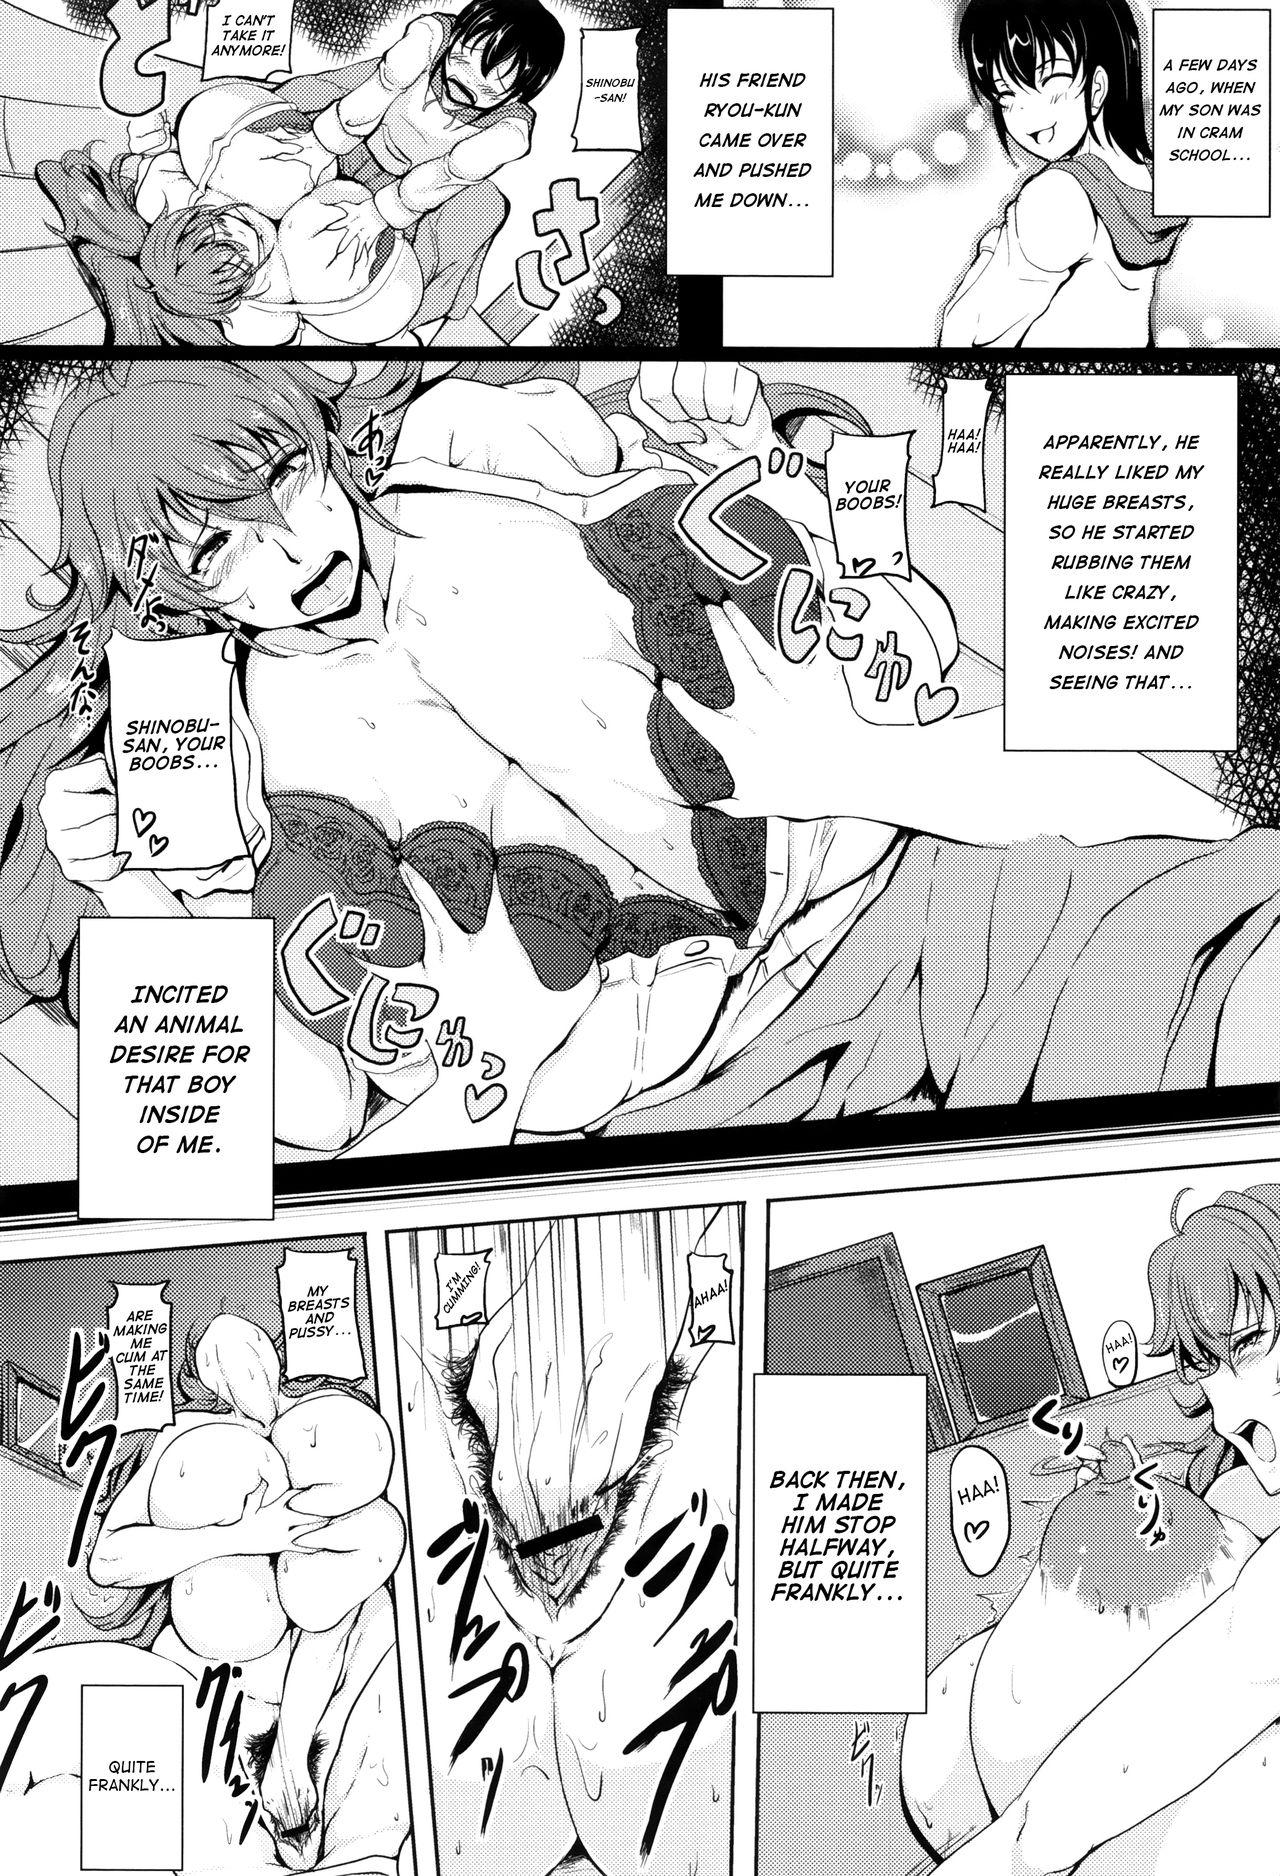 Smalltits Ikenai Tomohaha | Dirty Mother of a Friend Pay - Page 2